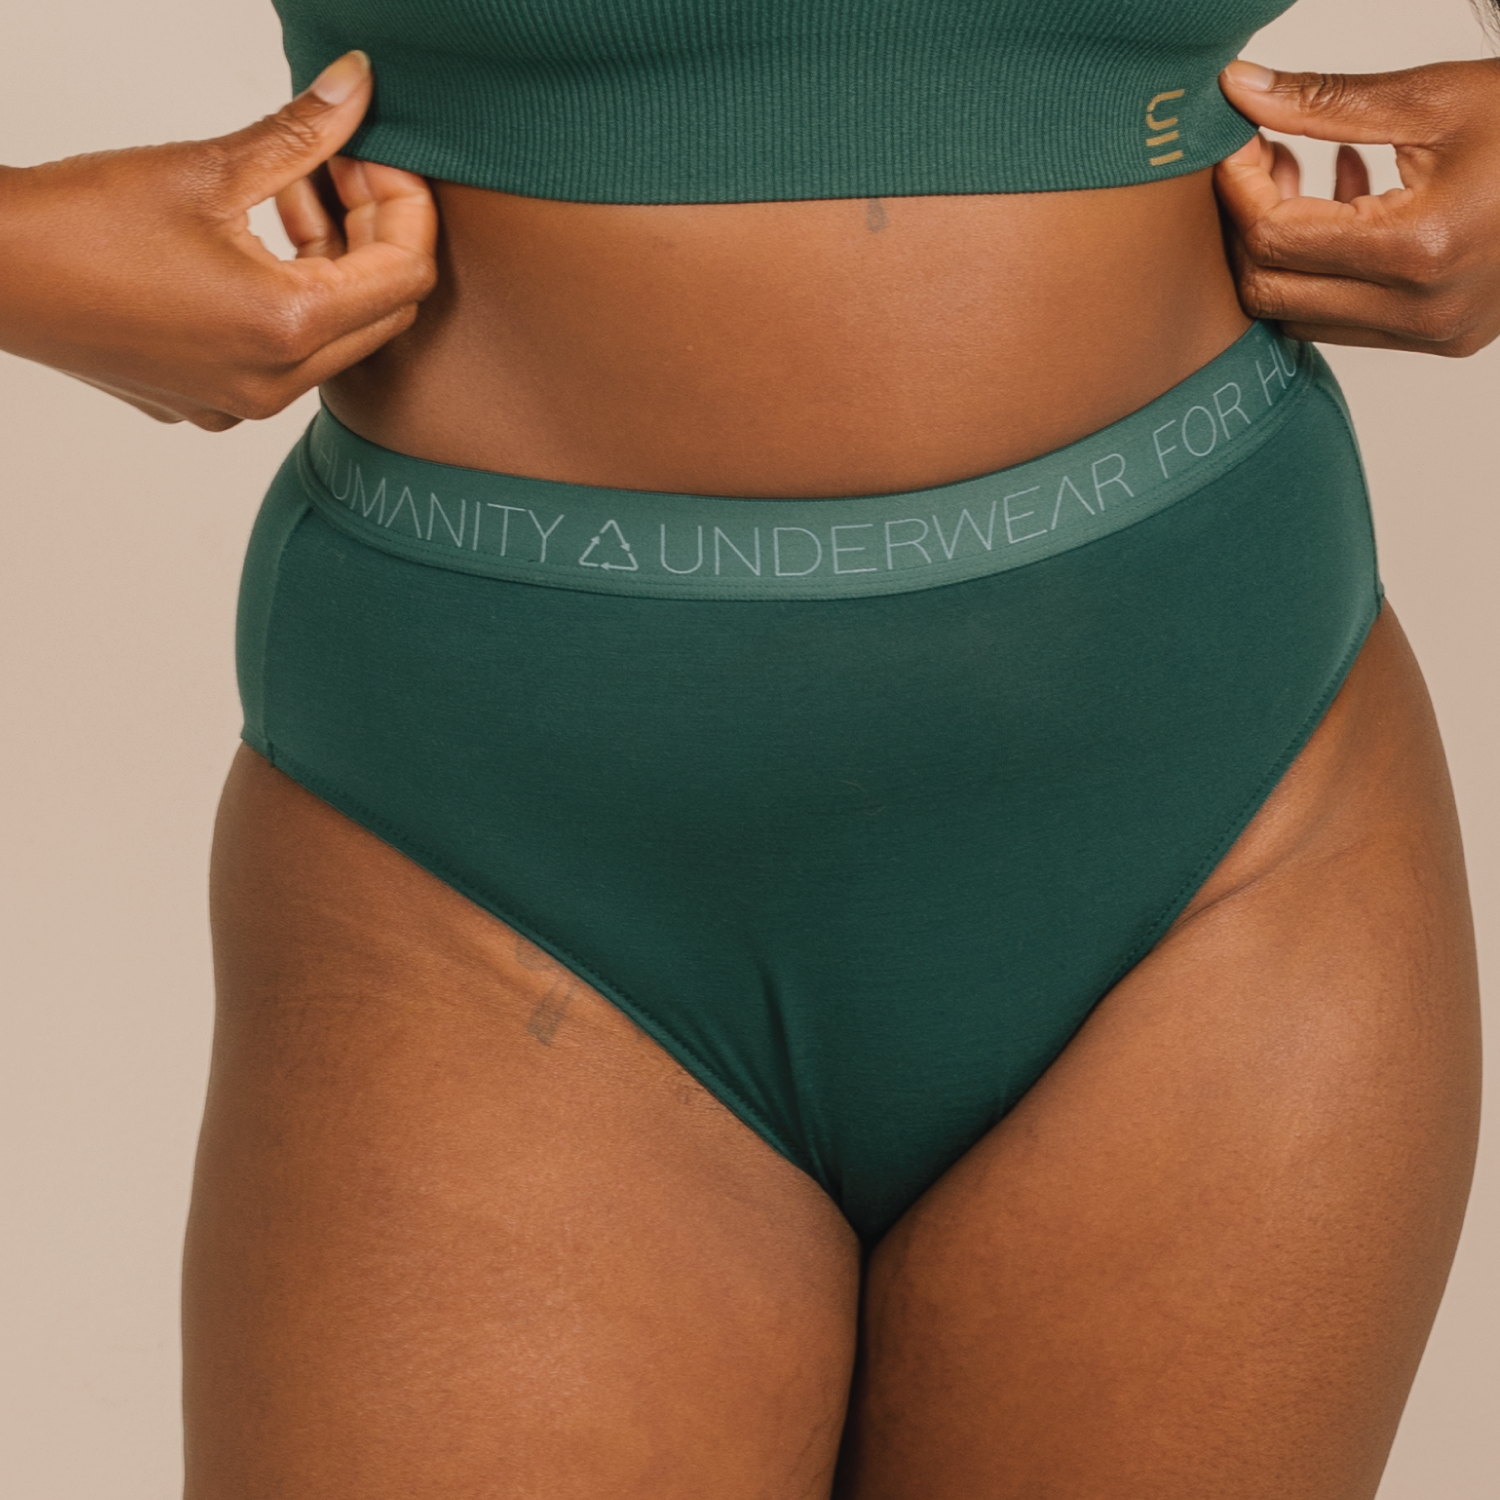 Sustainable atlantis high waist brief by Underwear for Humanity: ethical, sustainable. sizes 6-30 light, breathable. Models wear high-waisted underwear. underwear sits high on the waist, full seat coverage. smooth under clothing. made from Tencel and recycled materials, attached no-dig recycled elastic waist band.